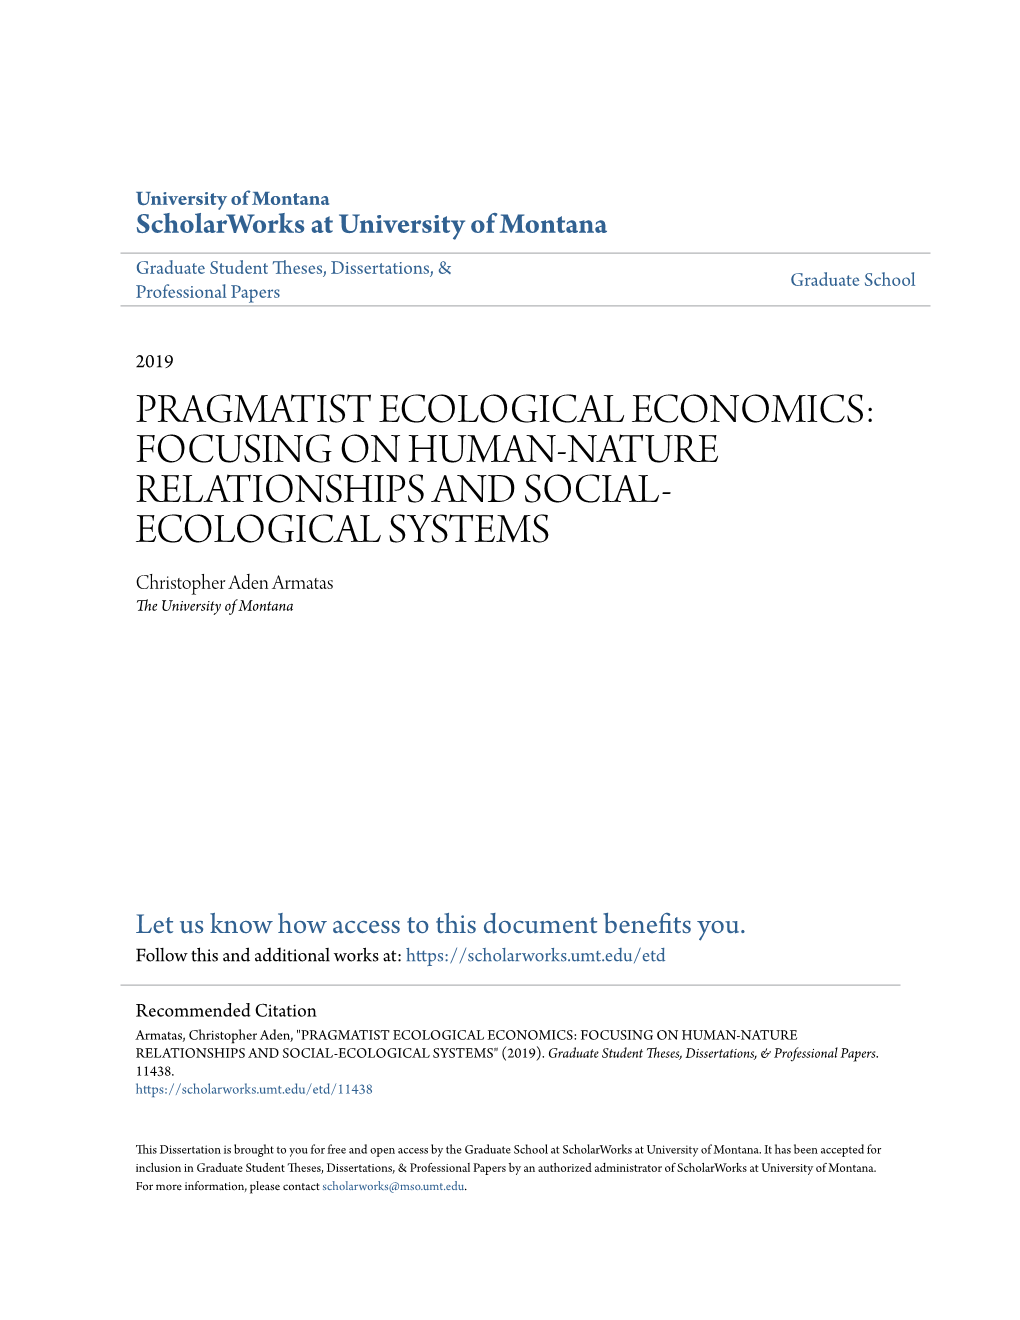 PRAGMATIST ECOLOGICAL ECONOMICS: FOCUSING on HUMAN-NATURE RELATIONSHIPS and SOCIAL- ECOLOGICAL SYSTEMS Christopher Aden Armatas the University of Montana